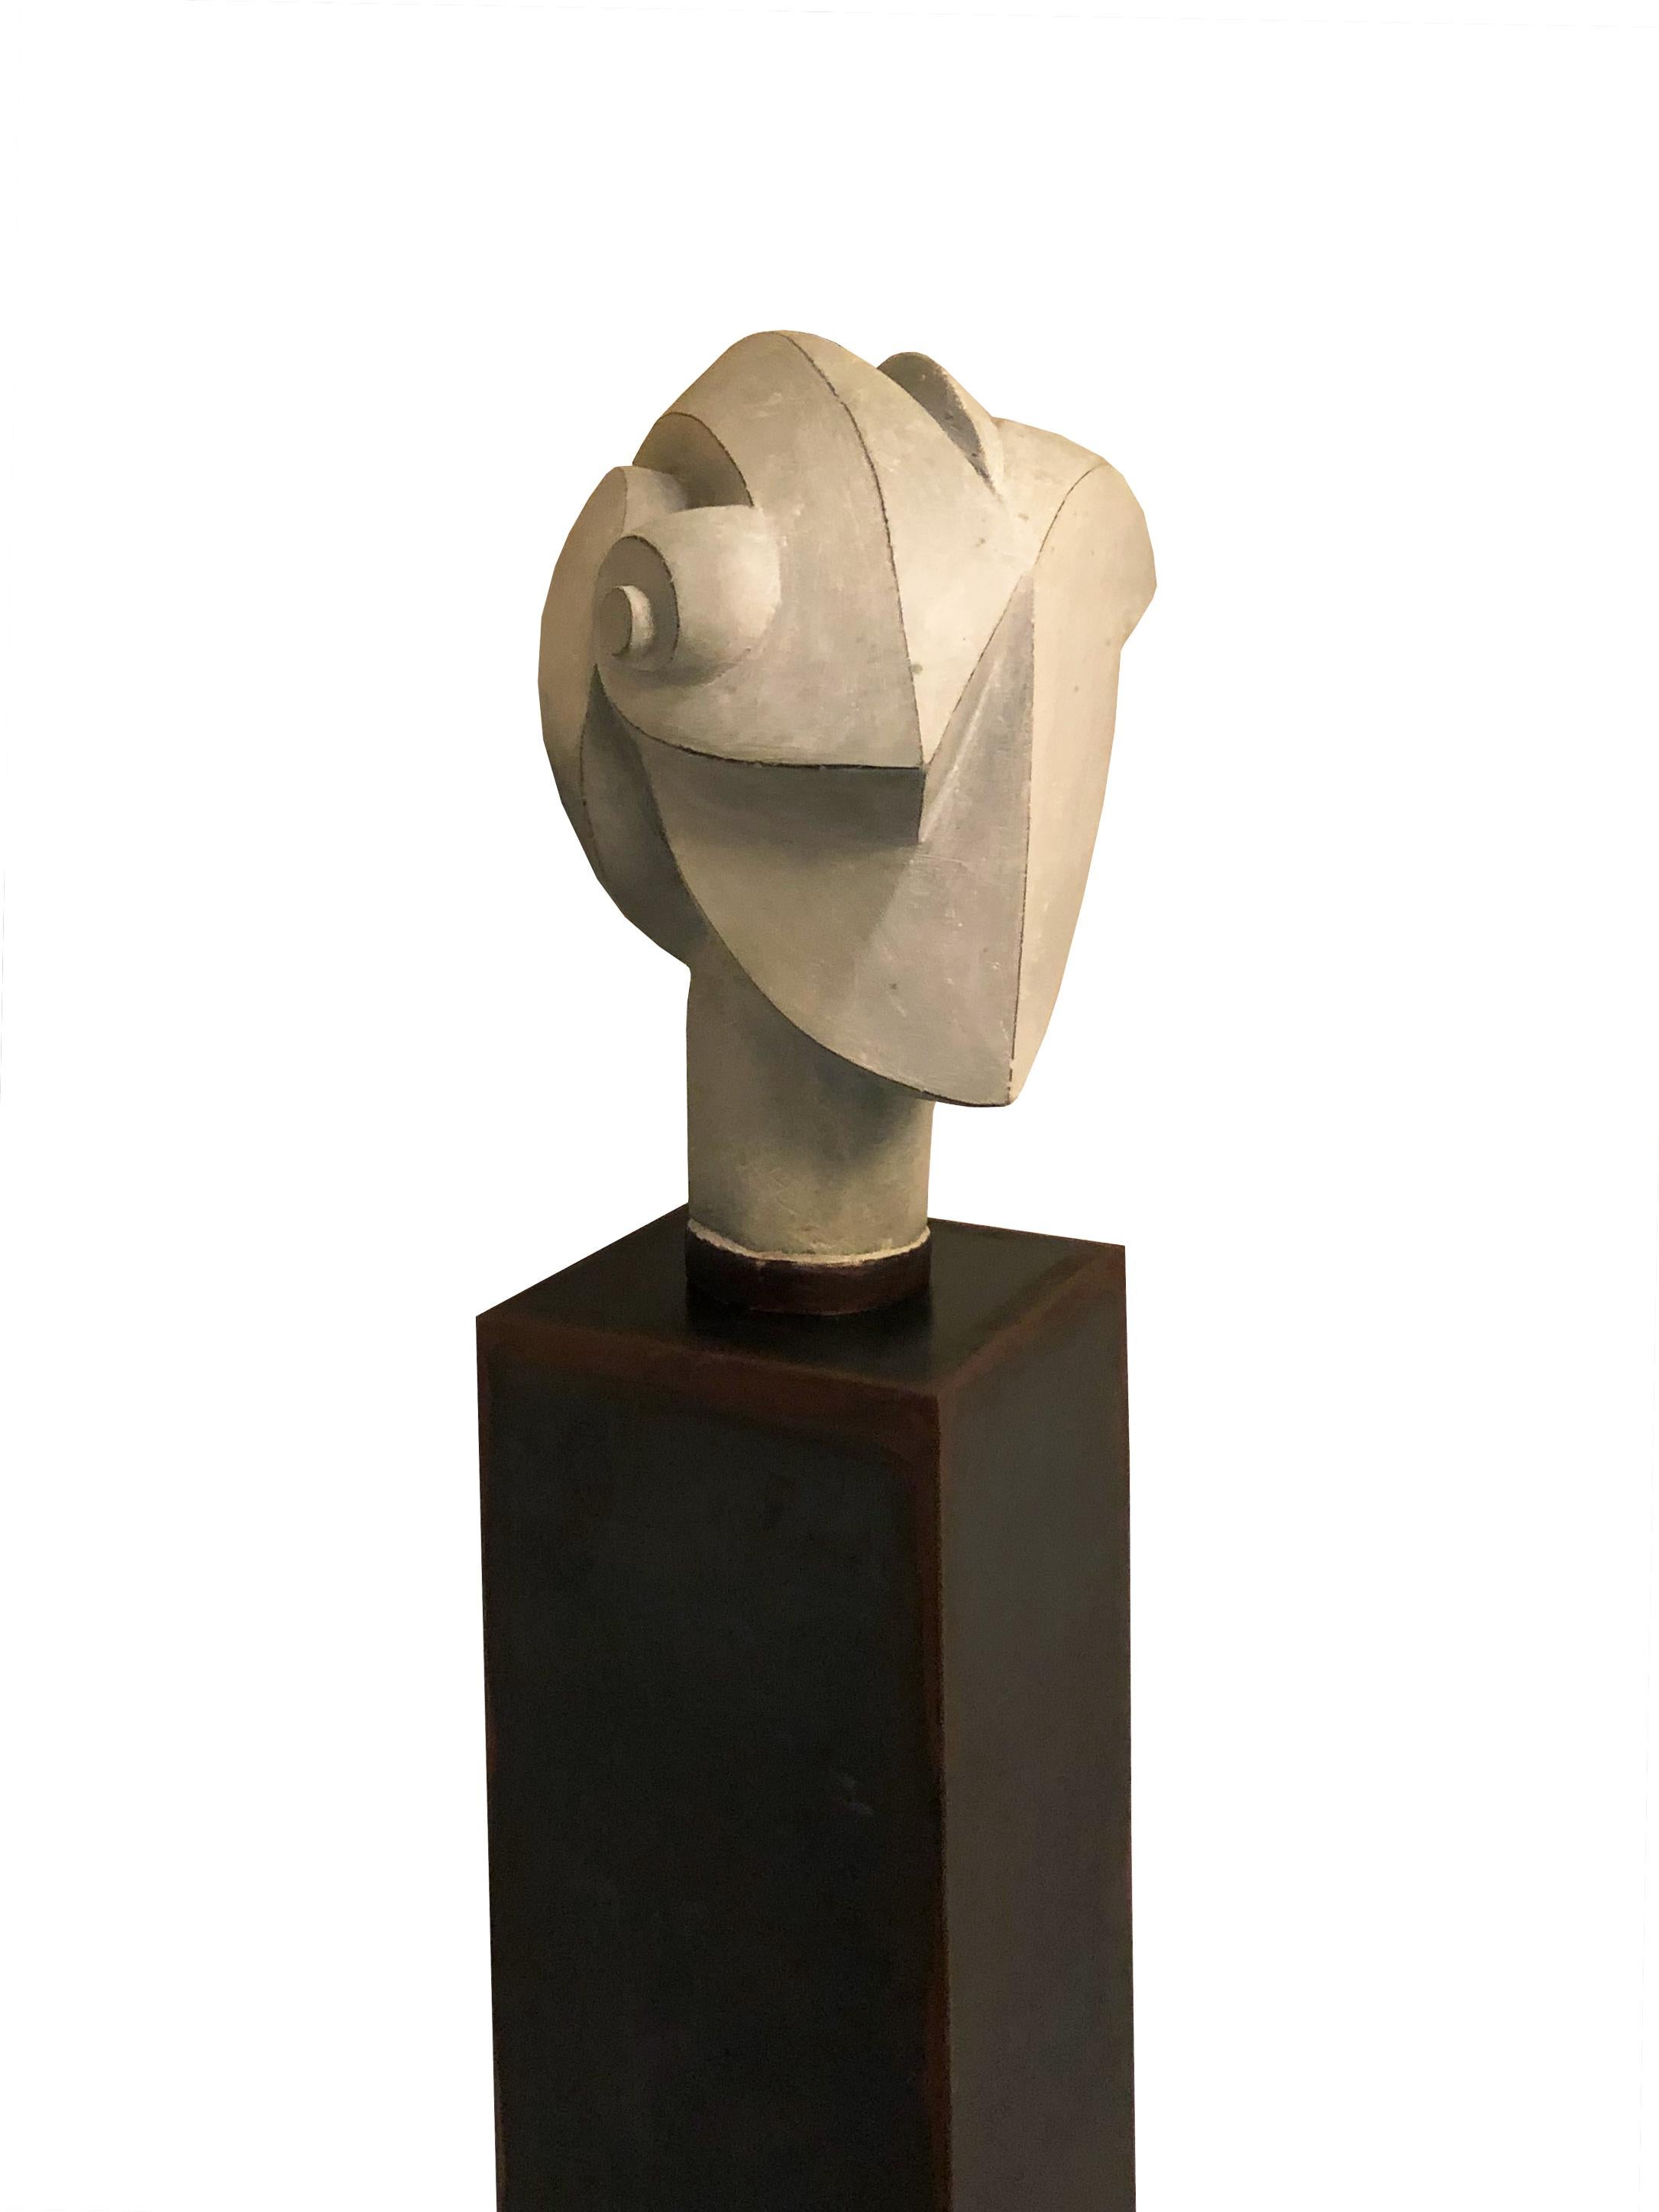 Contemporary cast bronze with white patina sculpture designed by Carmen Otero for her Viento Series. This beautiful pieces represents a futuristic rendering of a helmed head. This piece comes a long with a tall rectangular patinated metal